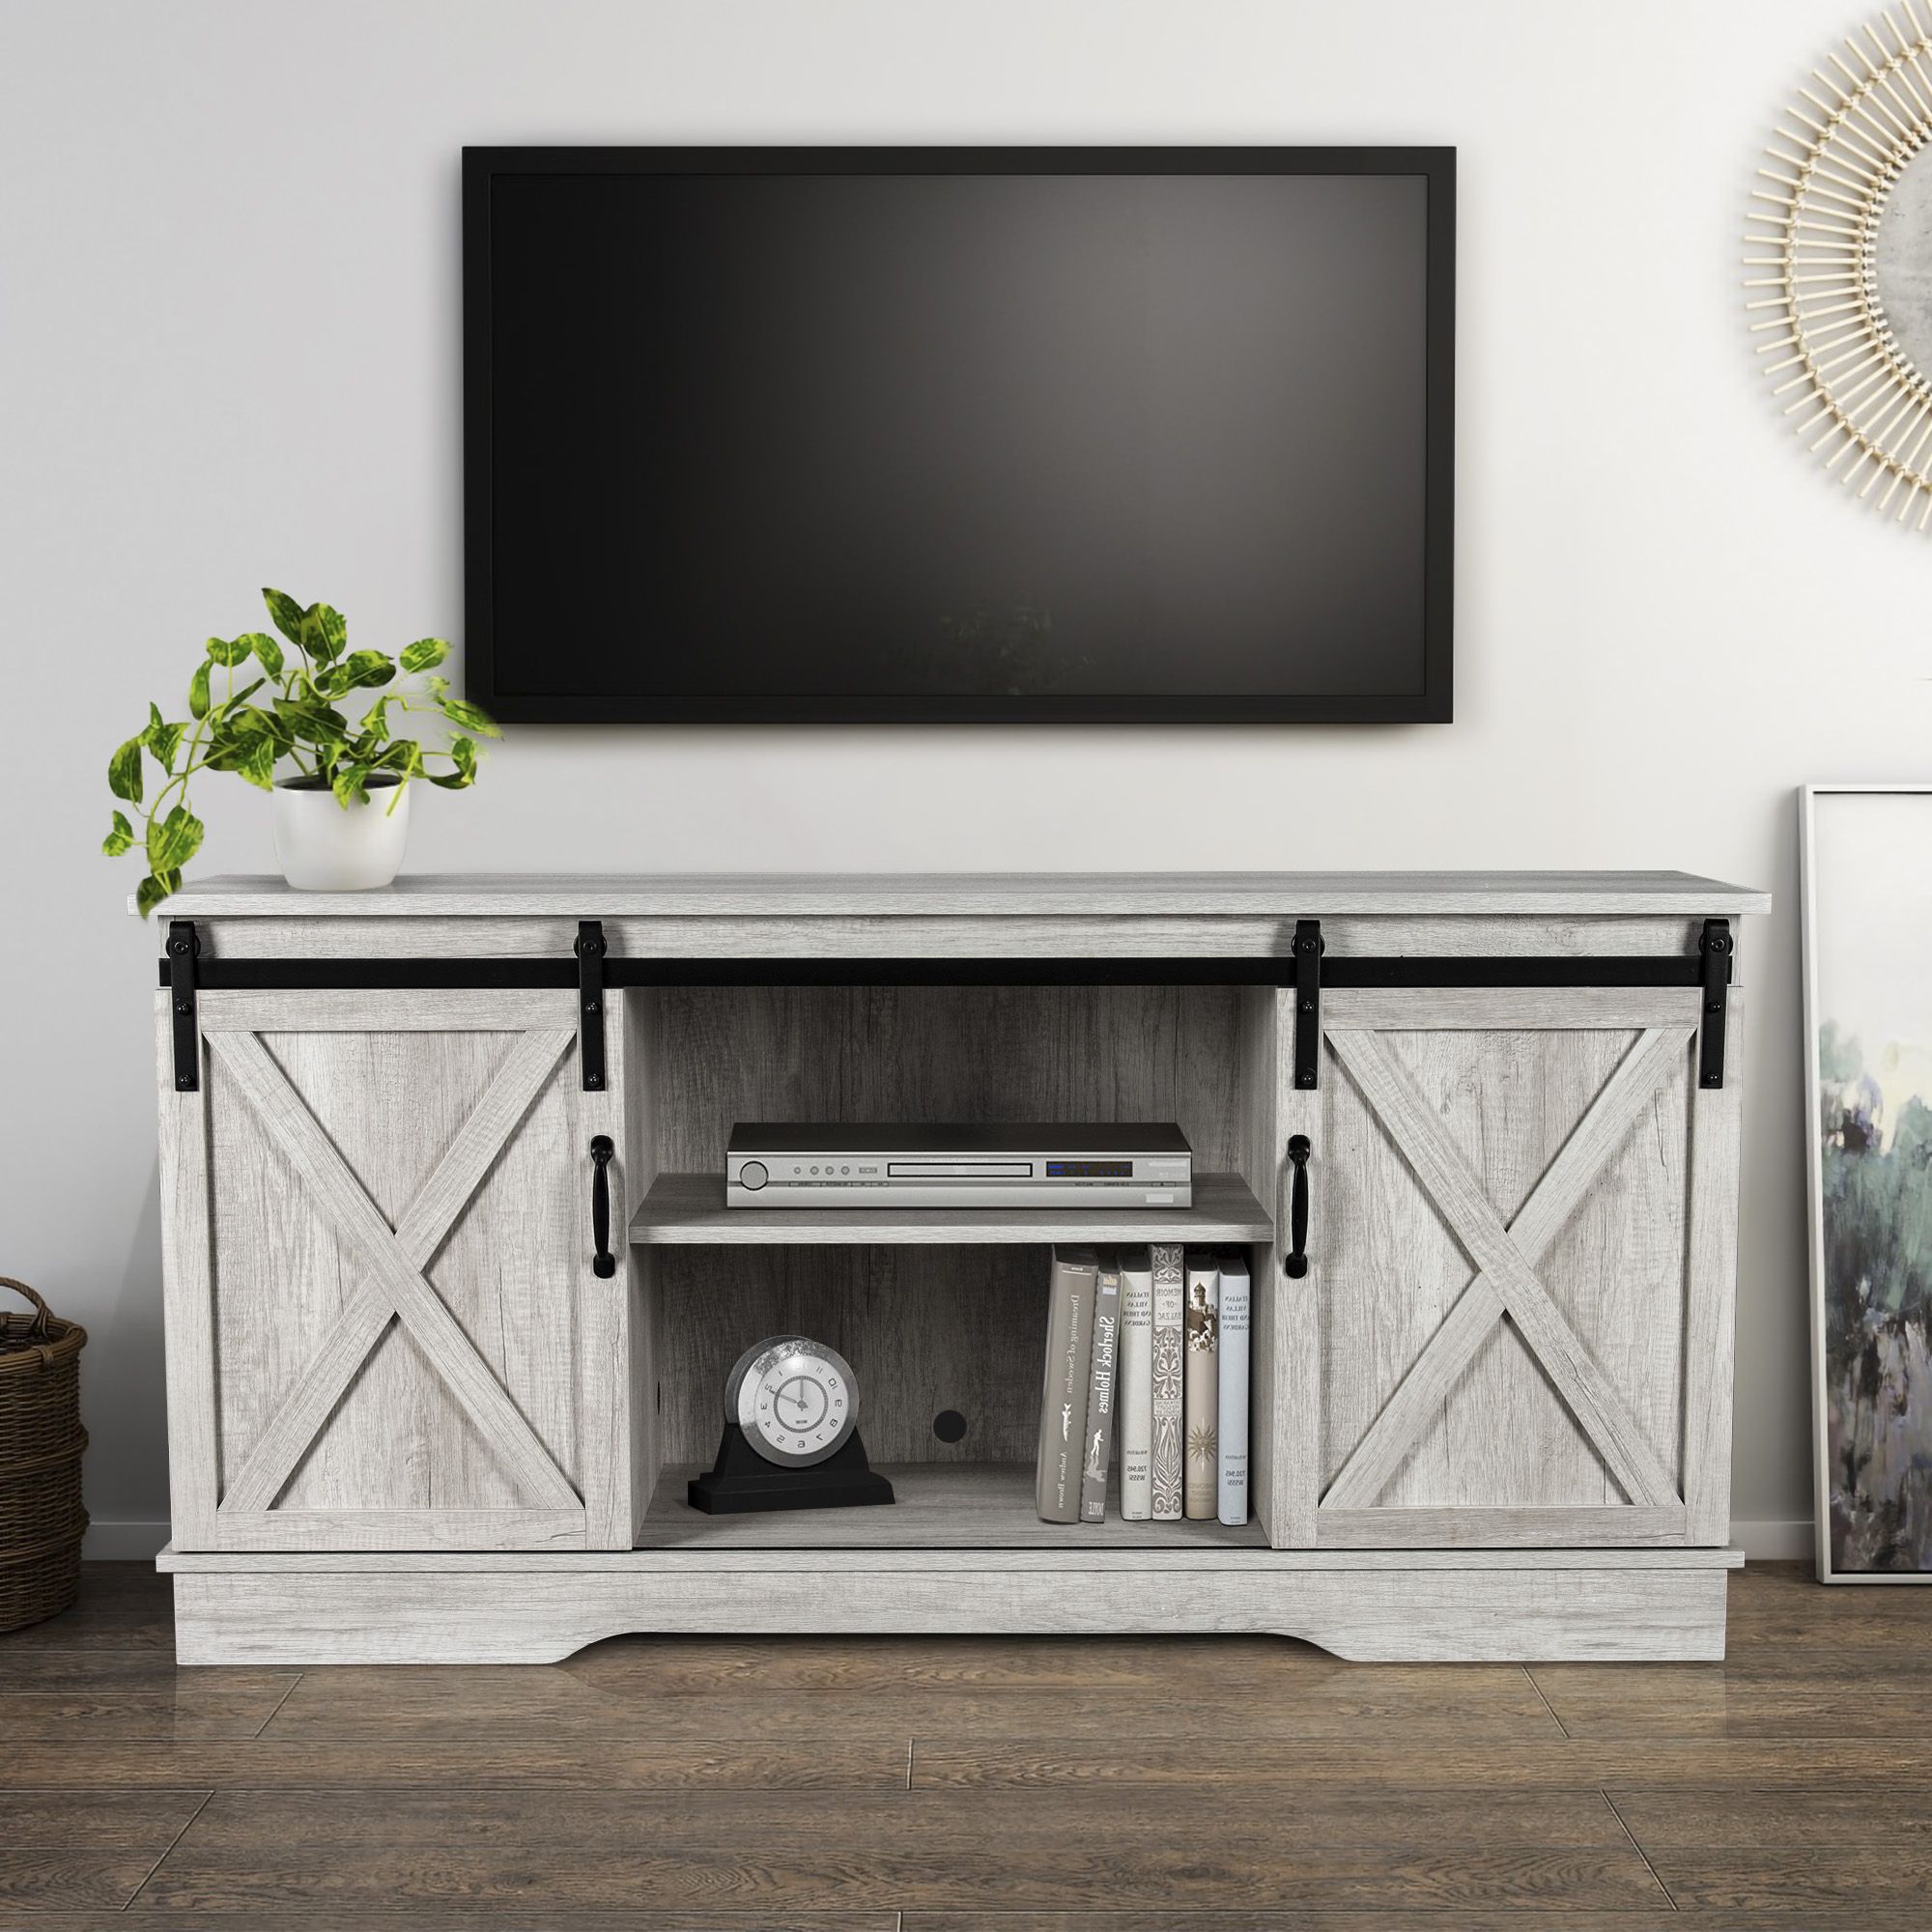 Belleze Modern Farmhouse Style 58 Inch Tv Stand With For Modern Farmhouse Tv Stands (Gallery 19 of 31)